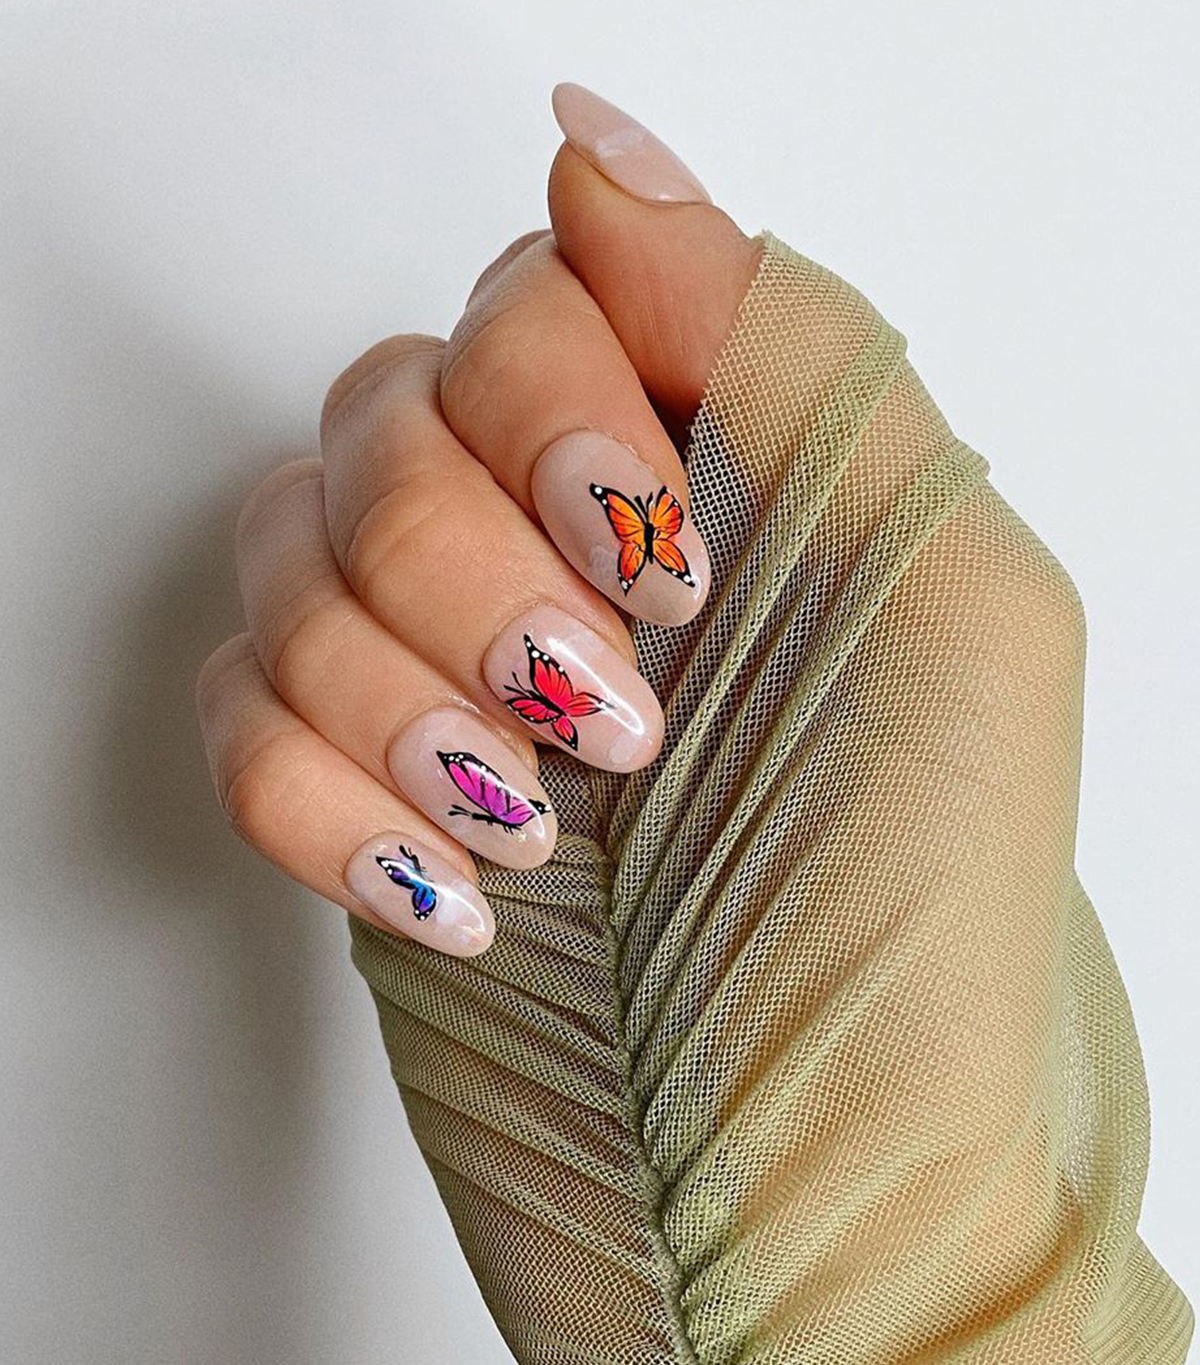 Easy Nail Art Designs For Beginners With Short Nails Without Tools  Easy  Nail Art Designs For Beginners With Short Nails Without Tools nail nails nail  art nails art design nails nails